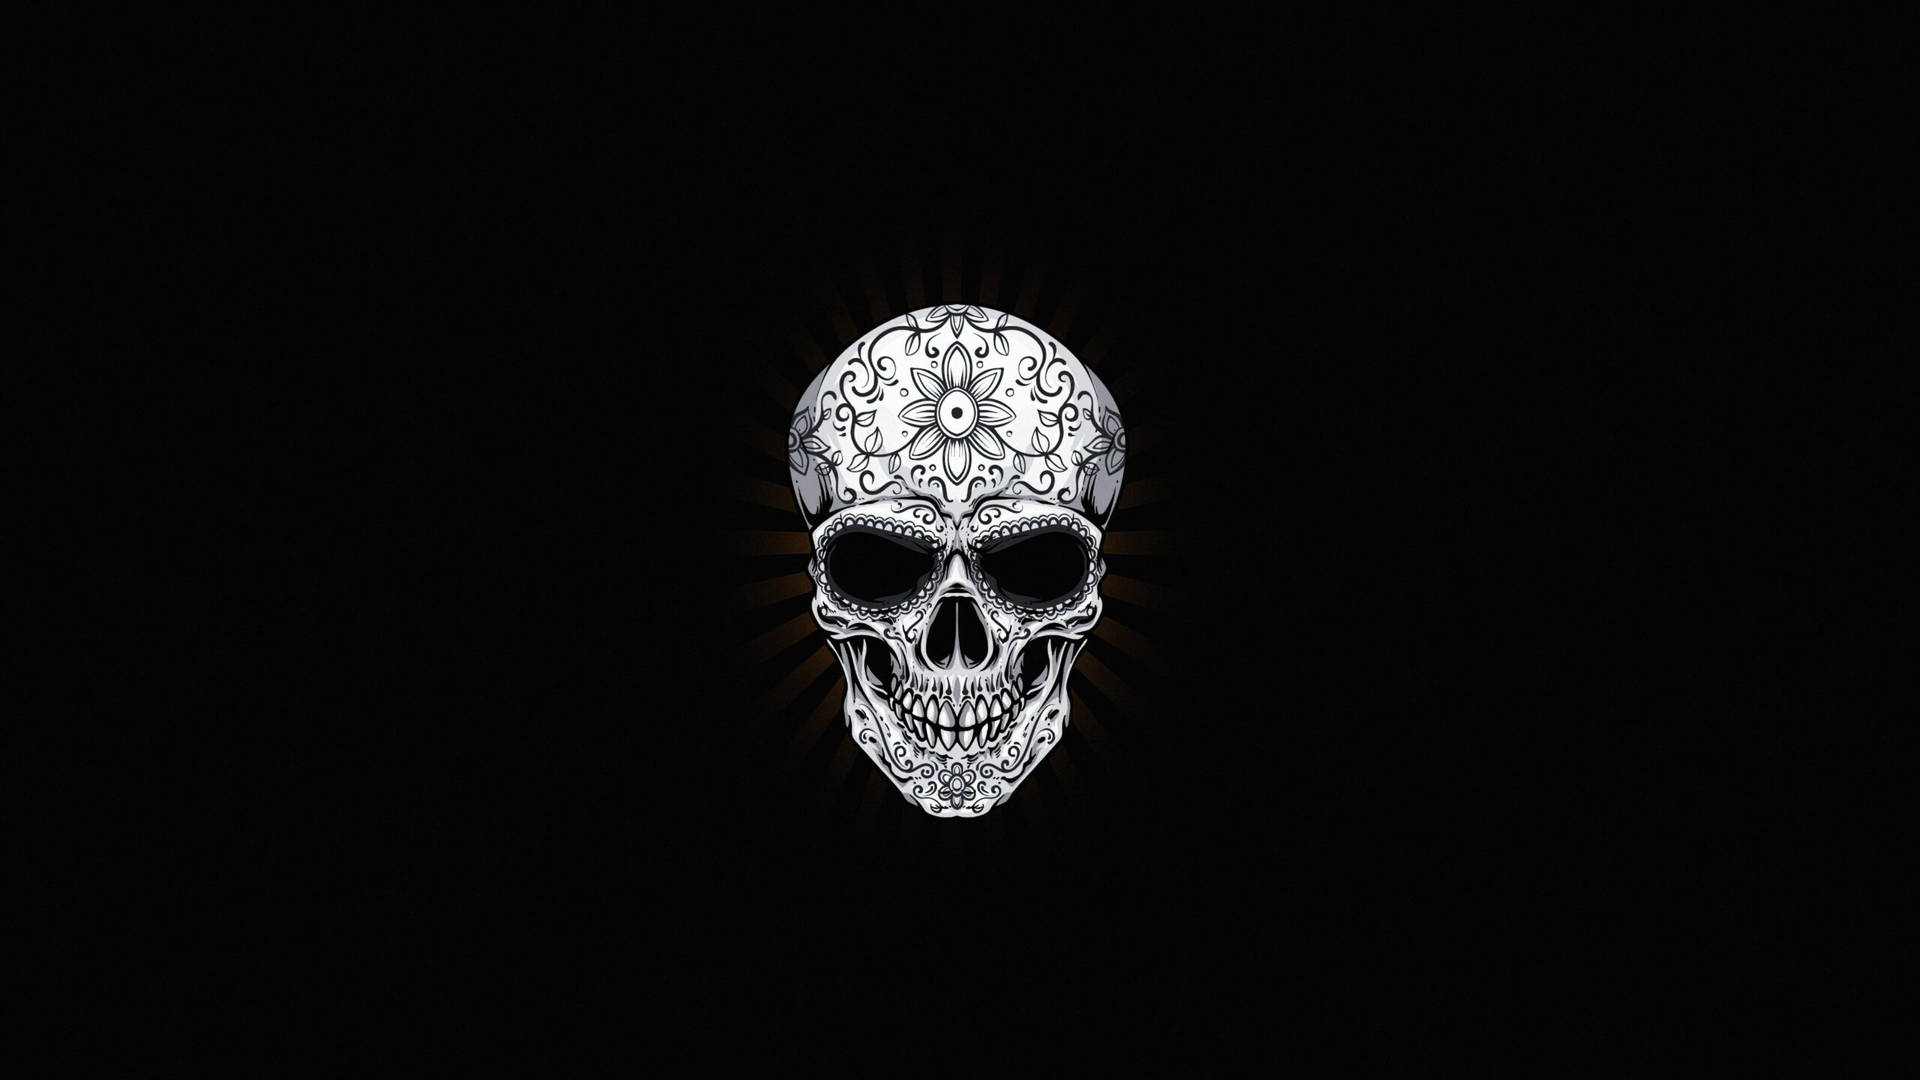 A Skull On A Black Background